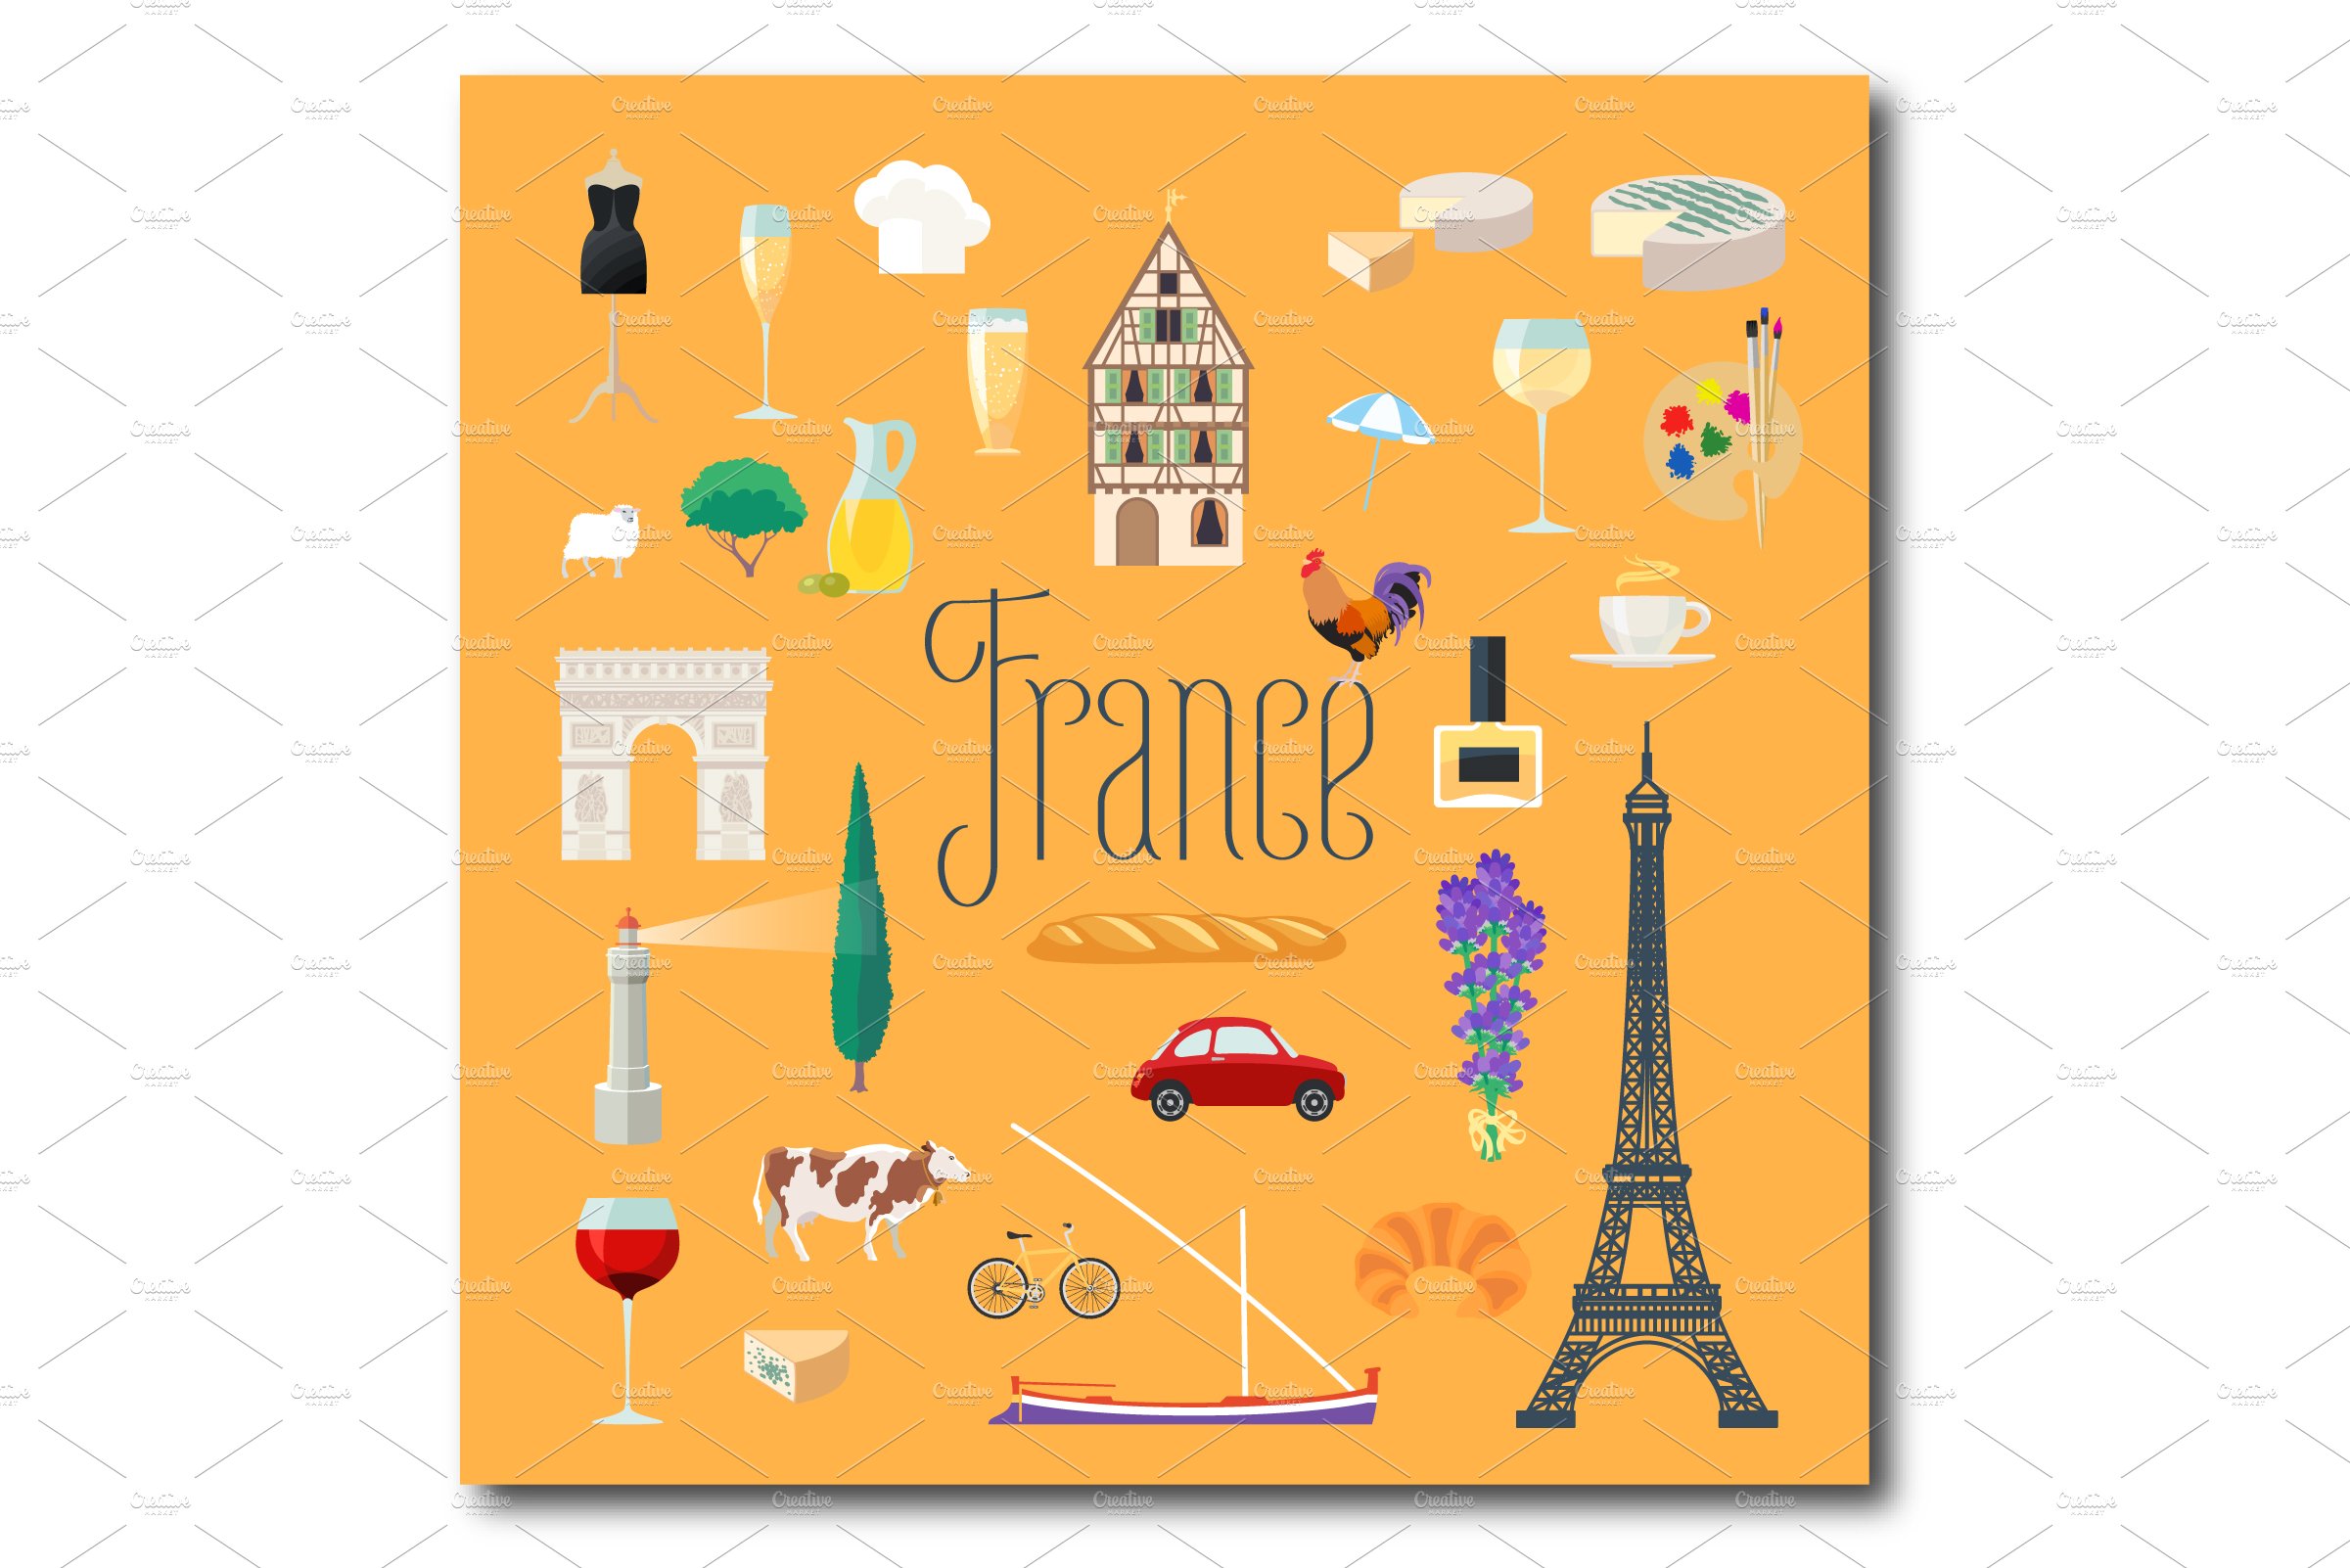 Travel to France vector icons set cover image.